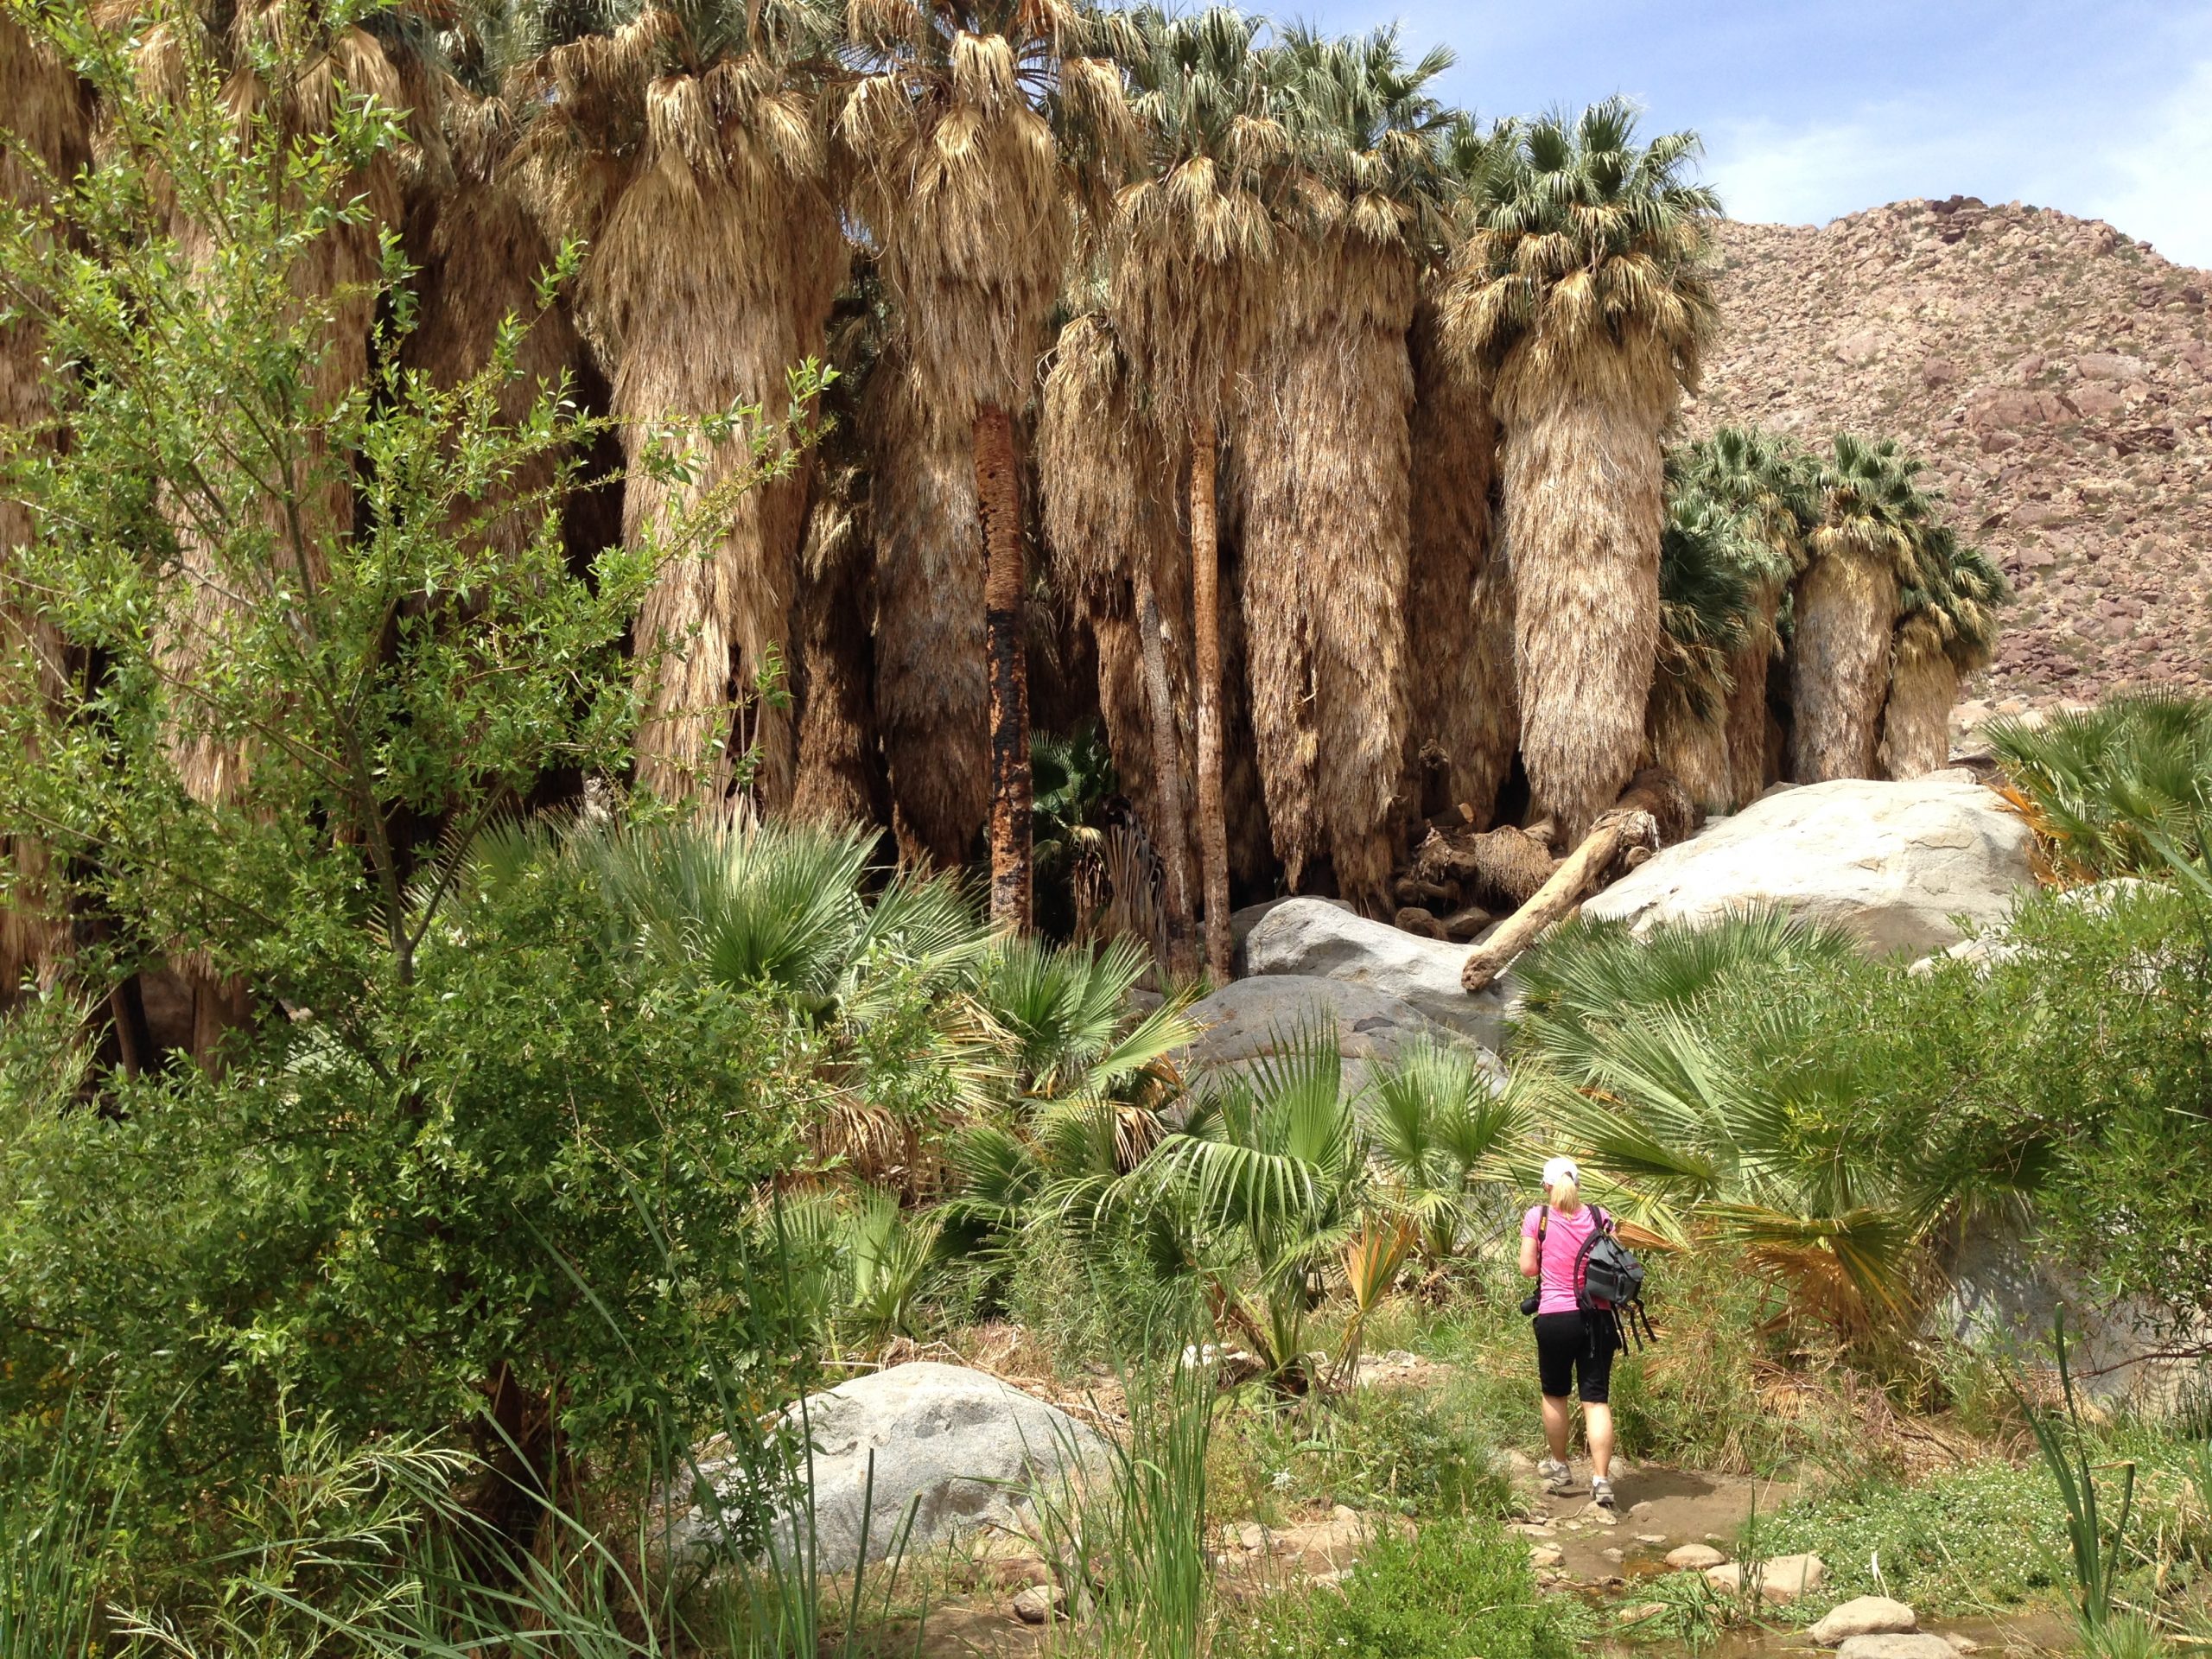 72 Hours in a Palm Springs Desert Oasis